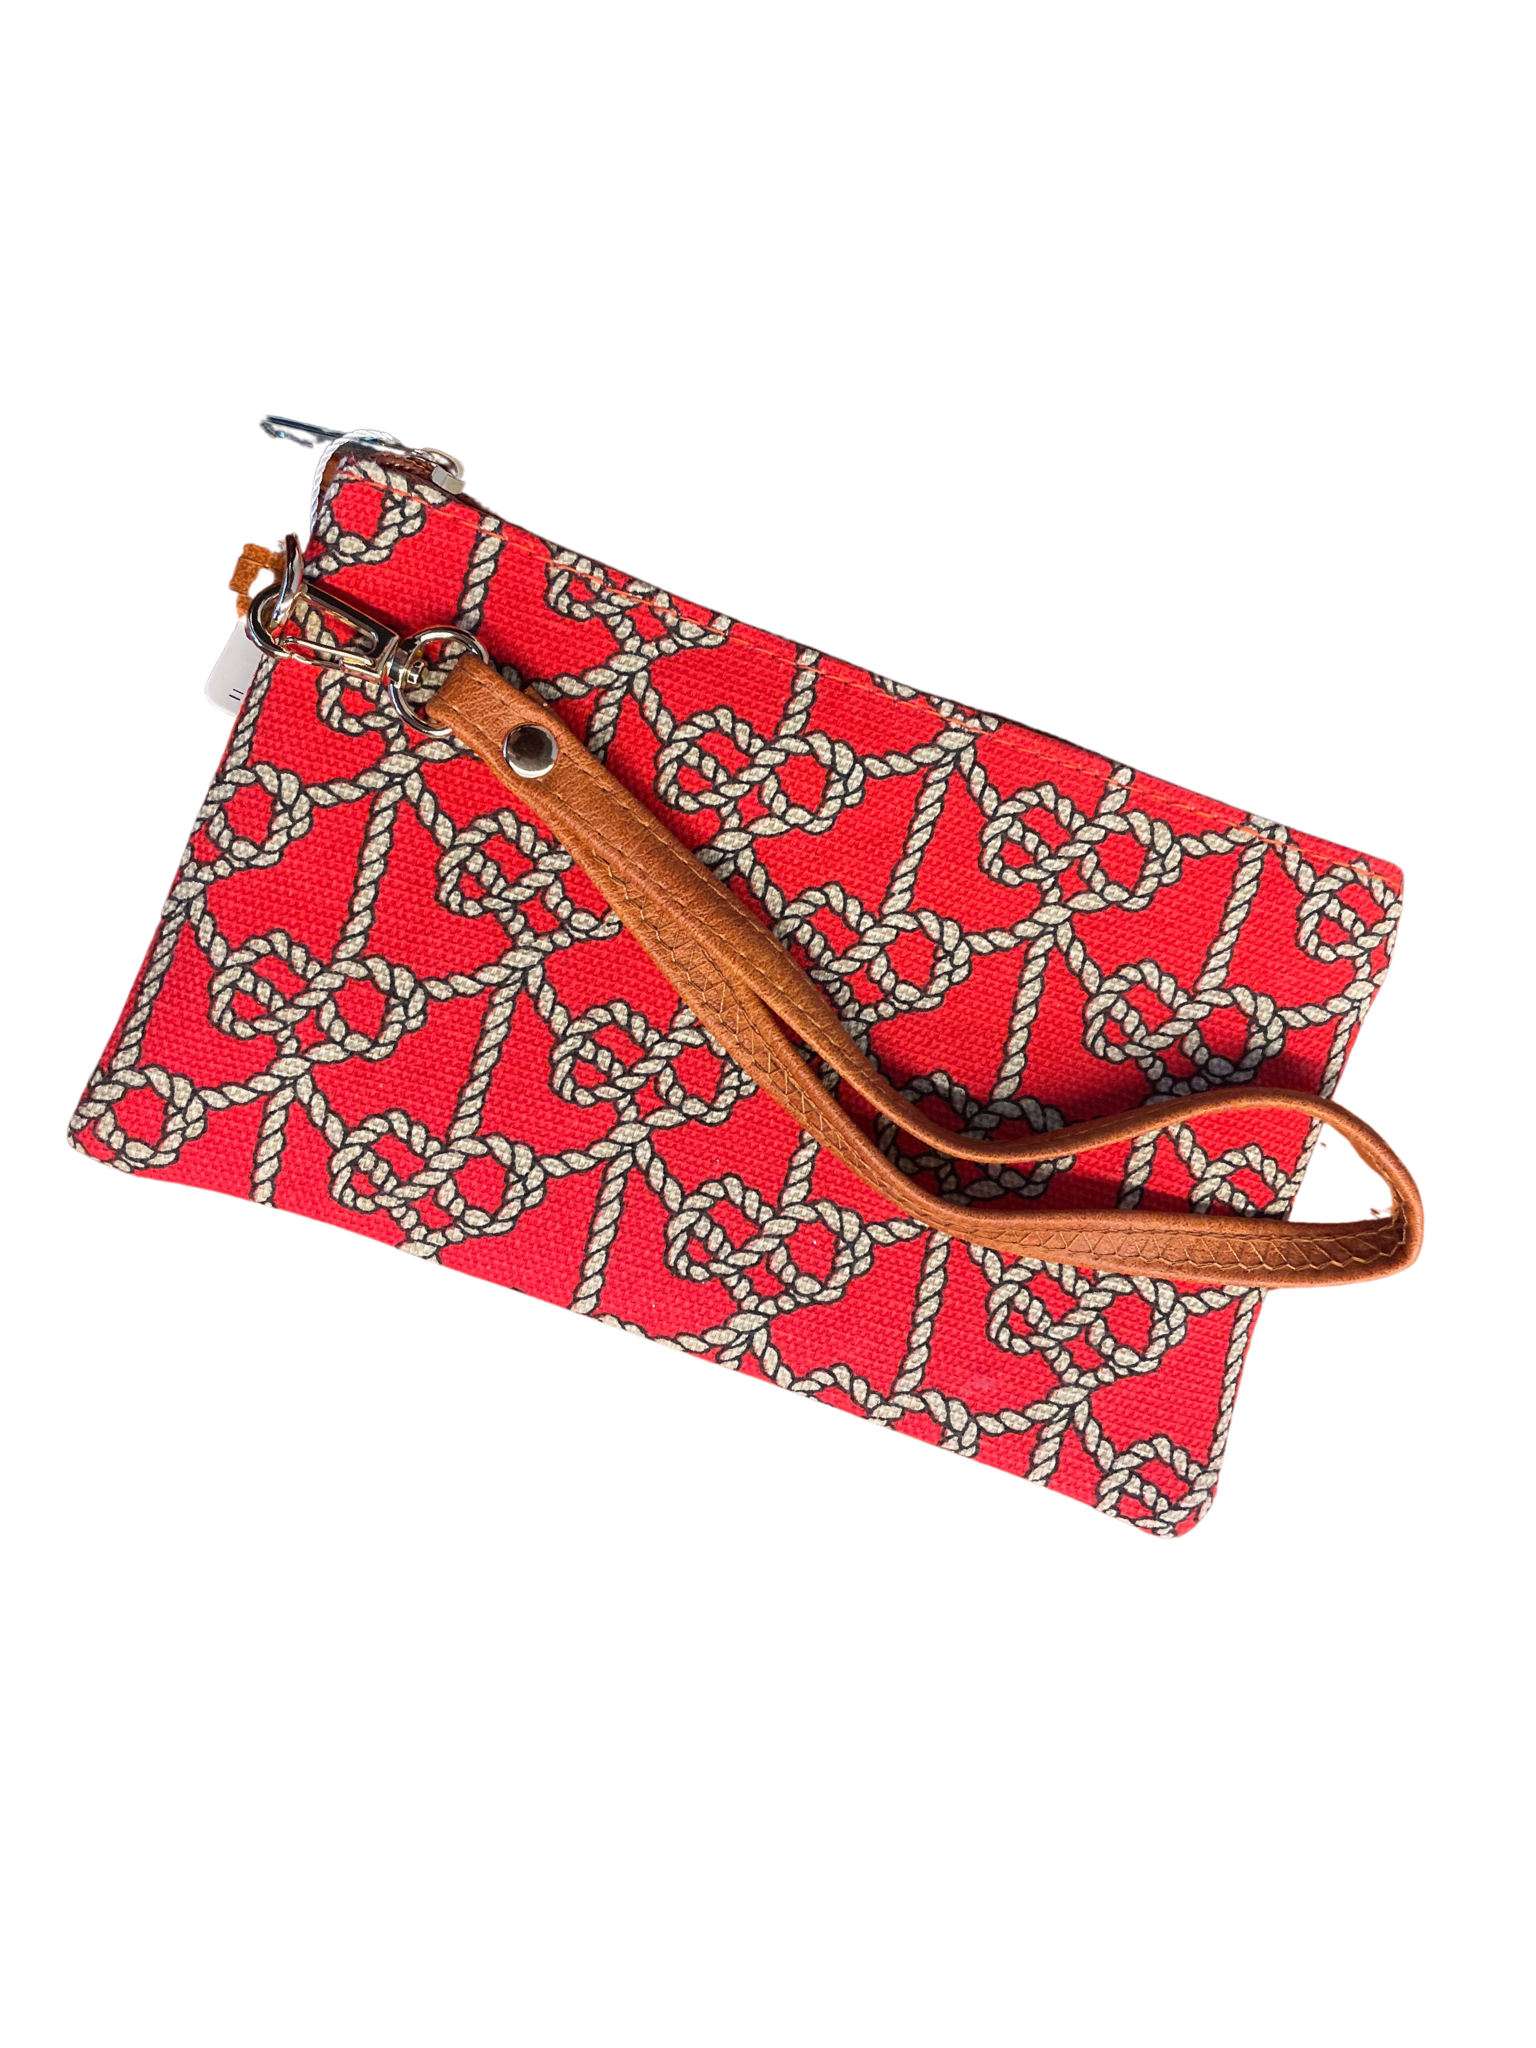 100% Polyester  Nautical theme wristlet with a tied rope design. This little cutie is fully lined with a zipper closure and wristlet handle.  APPROX. L 5" W 8" Wristlet L 9.5 "